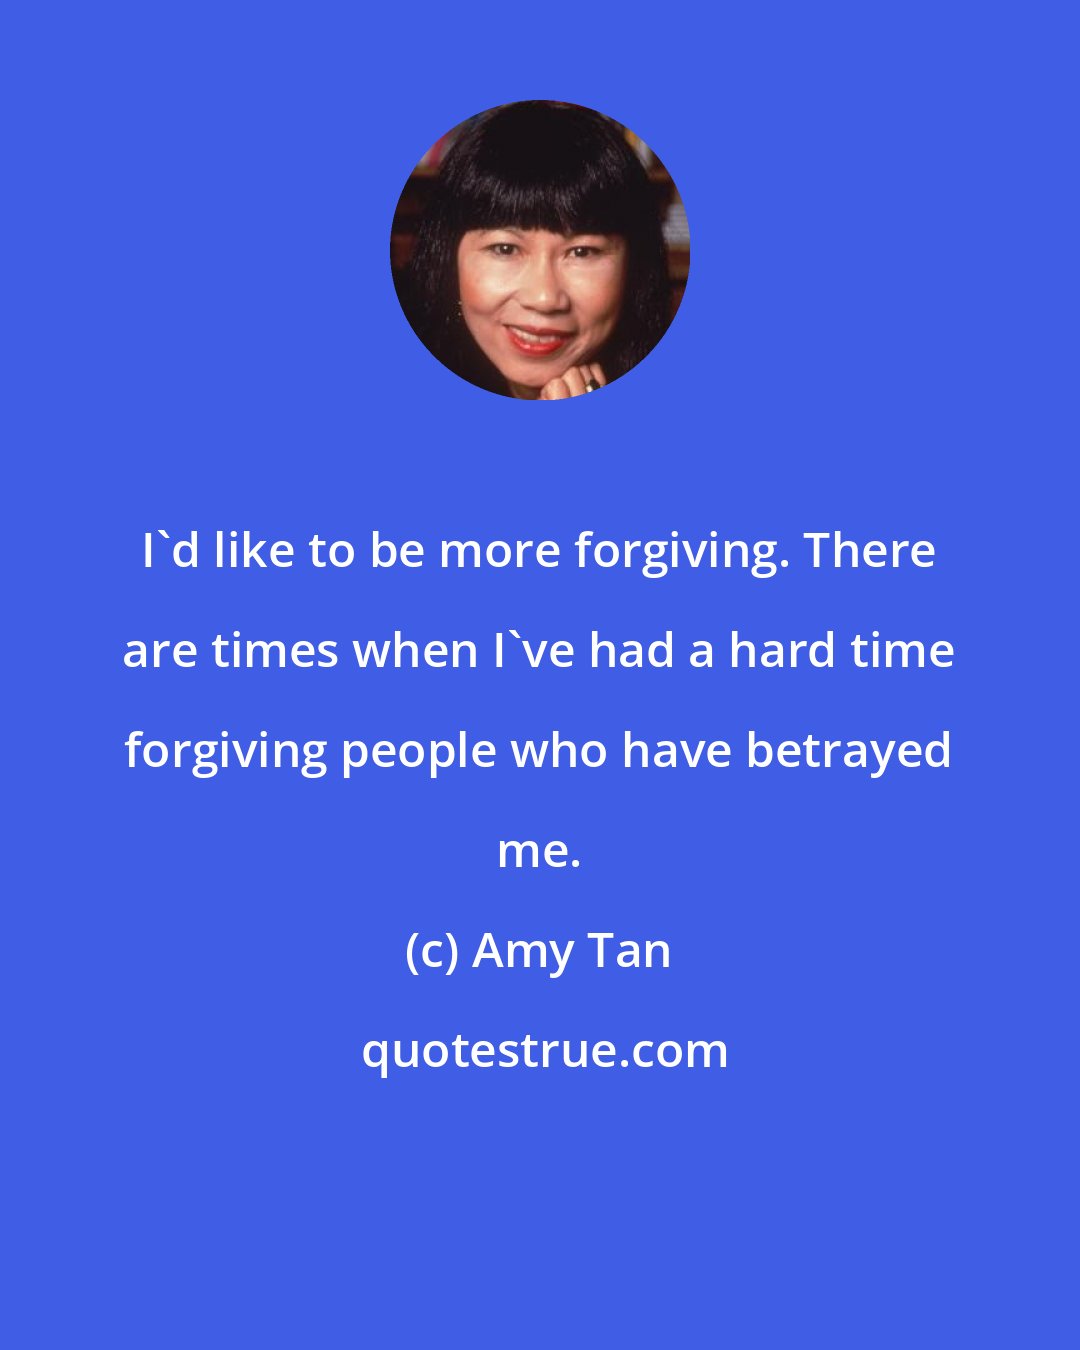 Amy Tan: I'd like to be more forgiving. There are times when I've had a hard time forgiving people who have betrayed me.